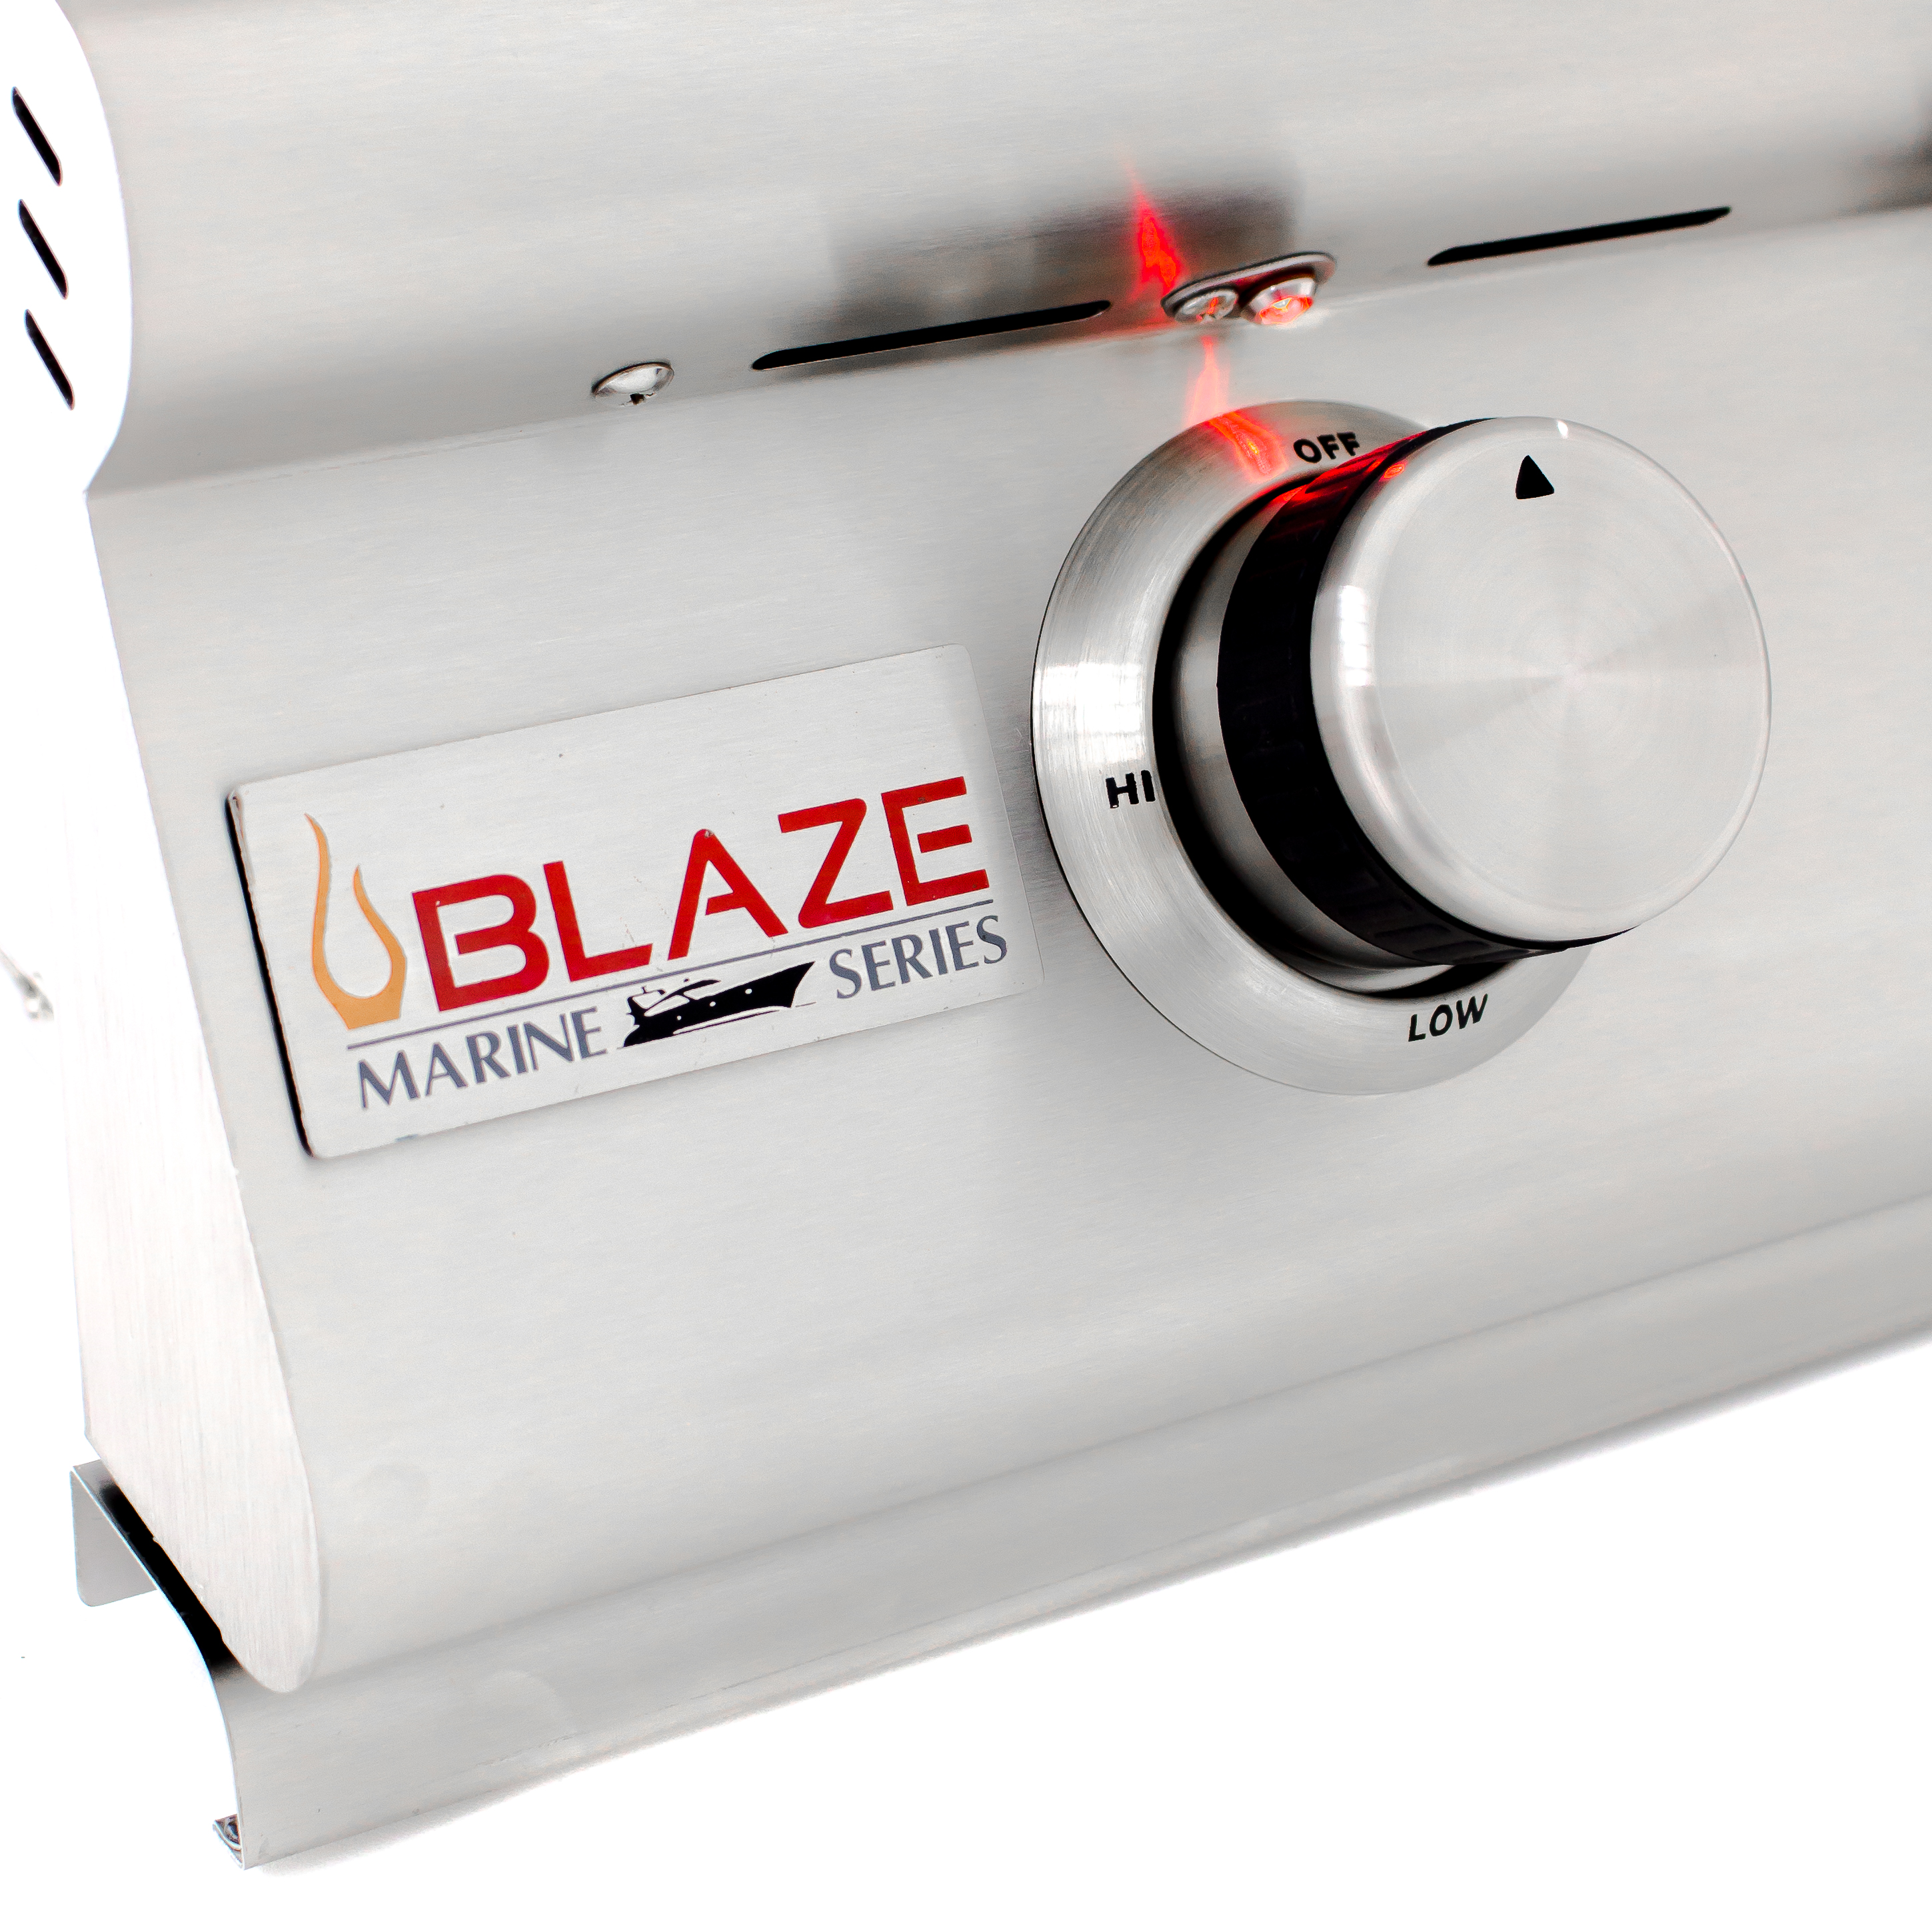 View our selection of professional Blaze Barbecue Grills 